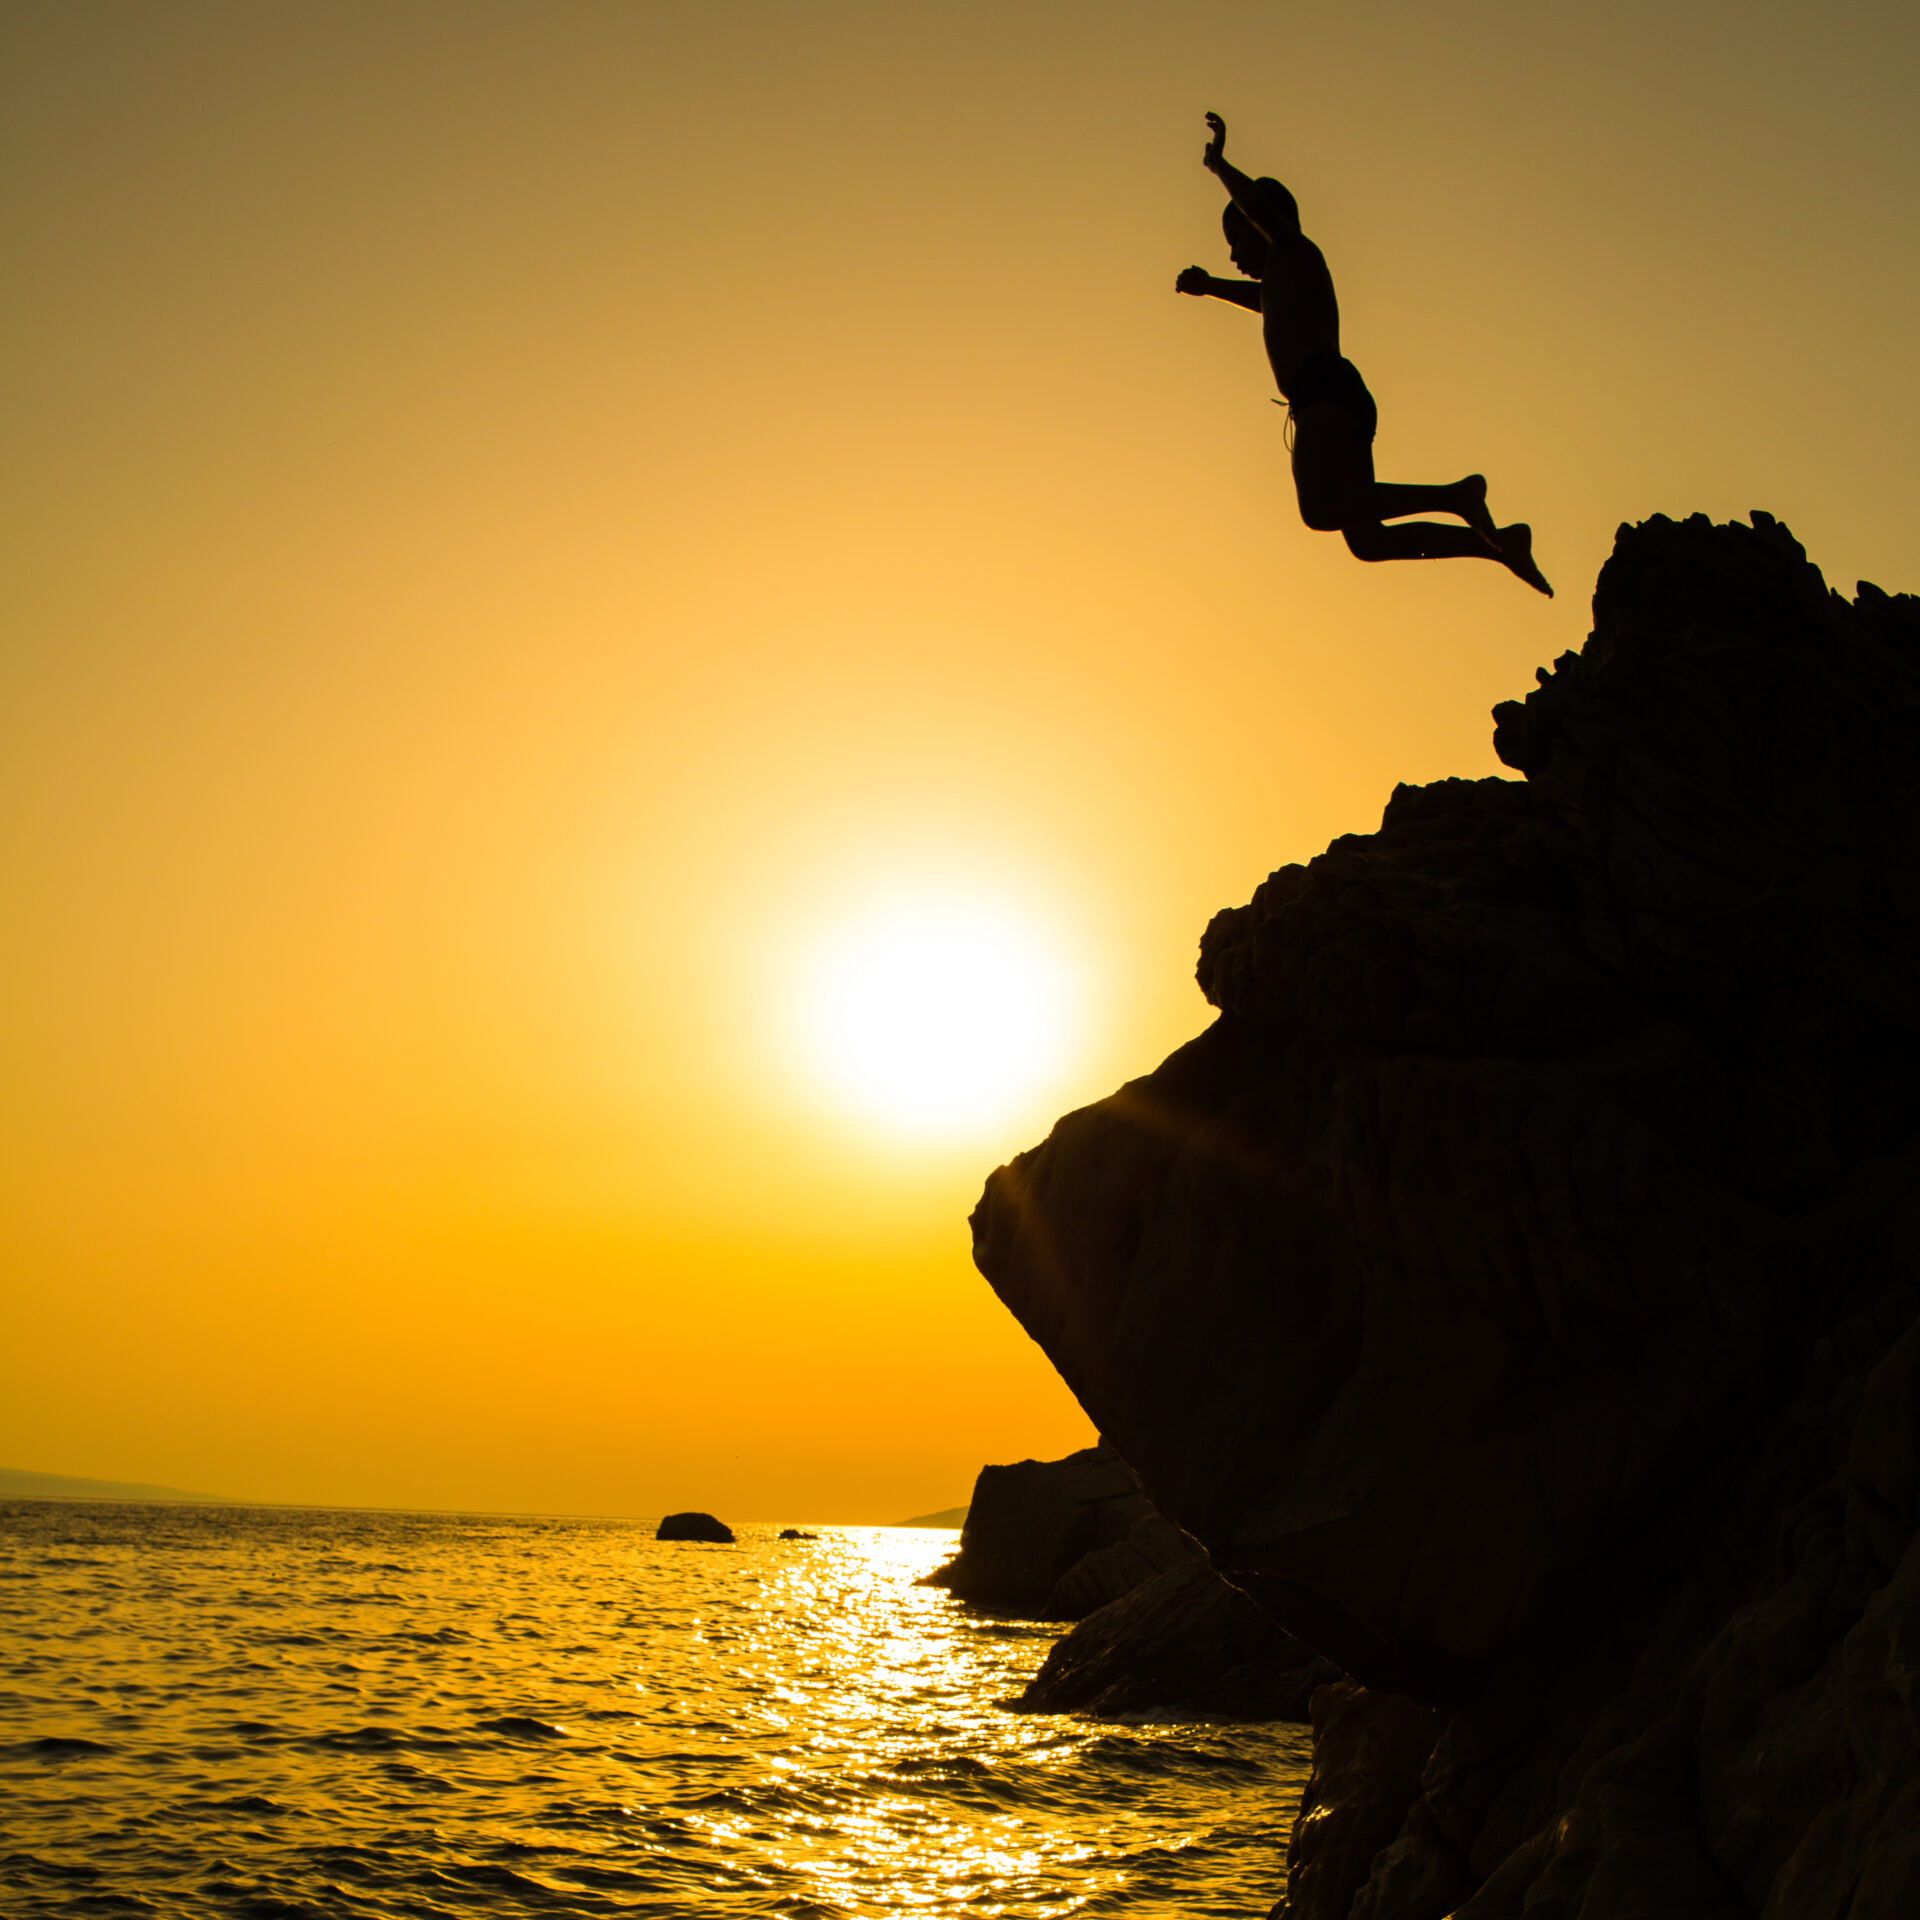 Jumping in the ocean from a cliff at sunset.